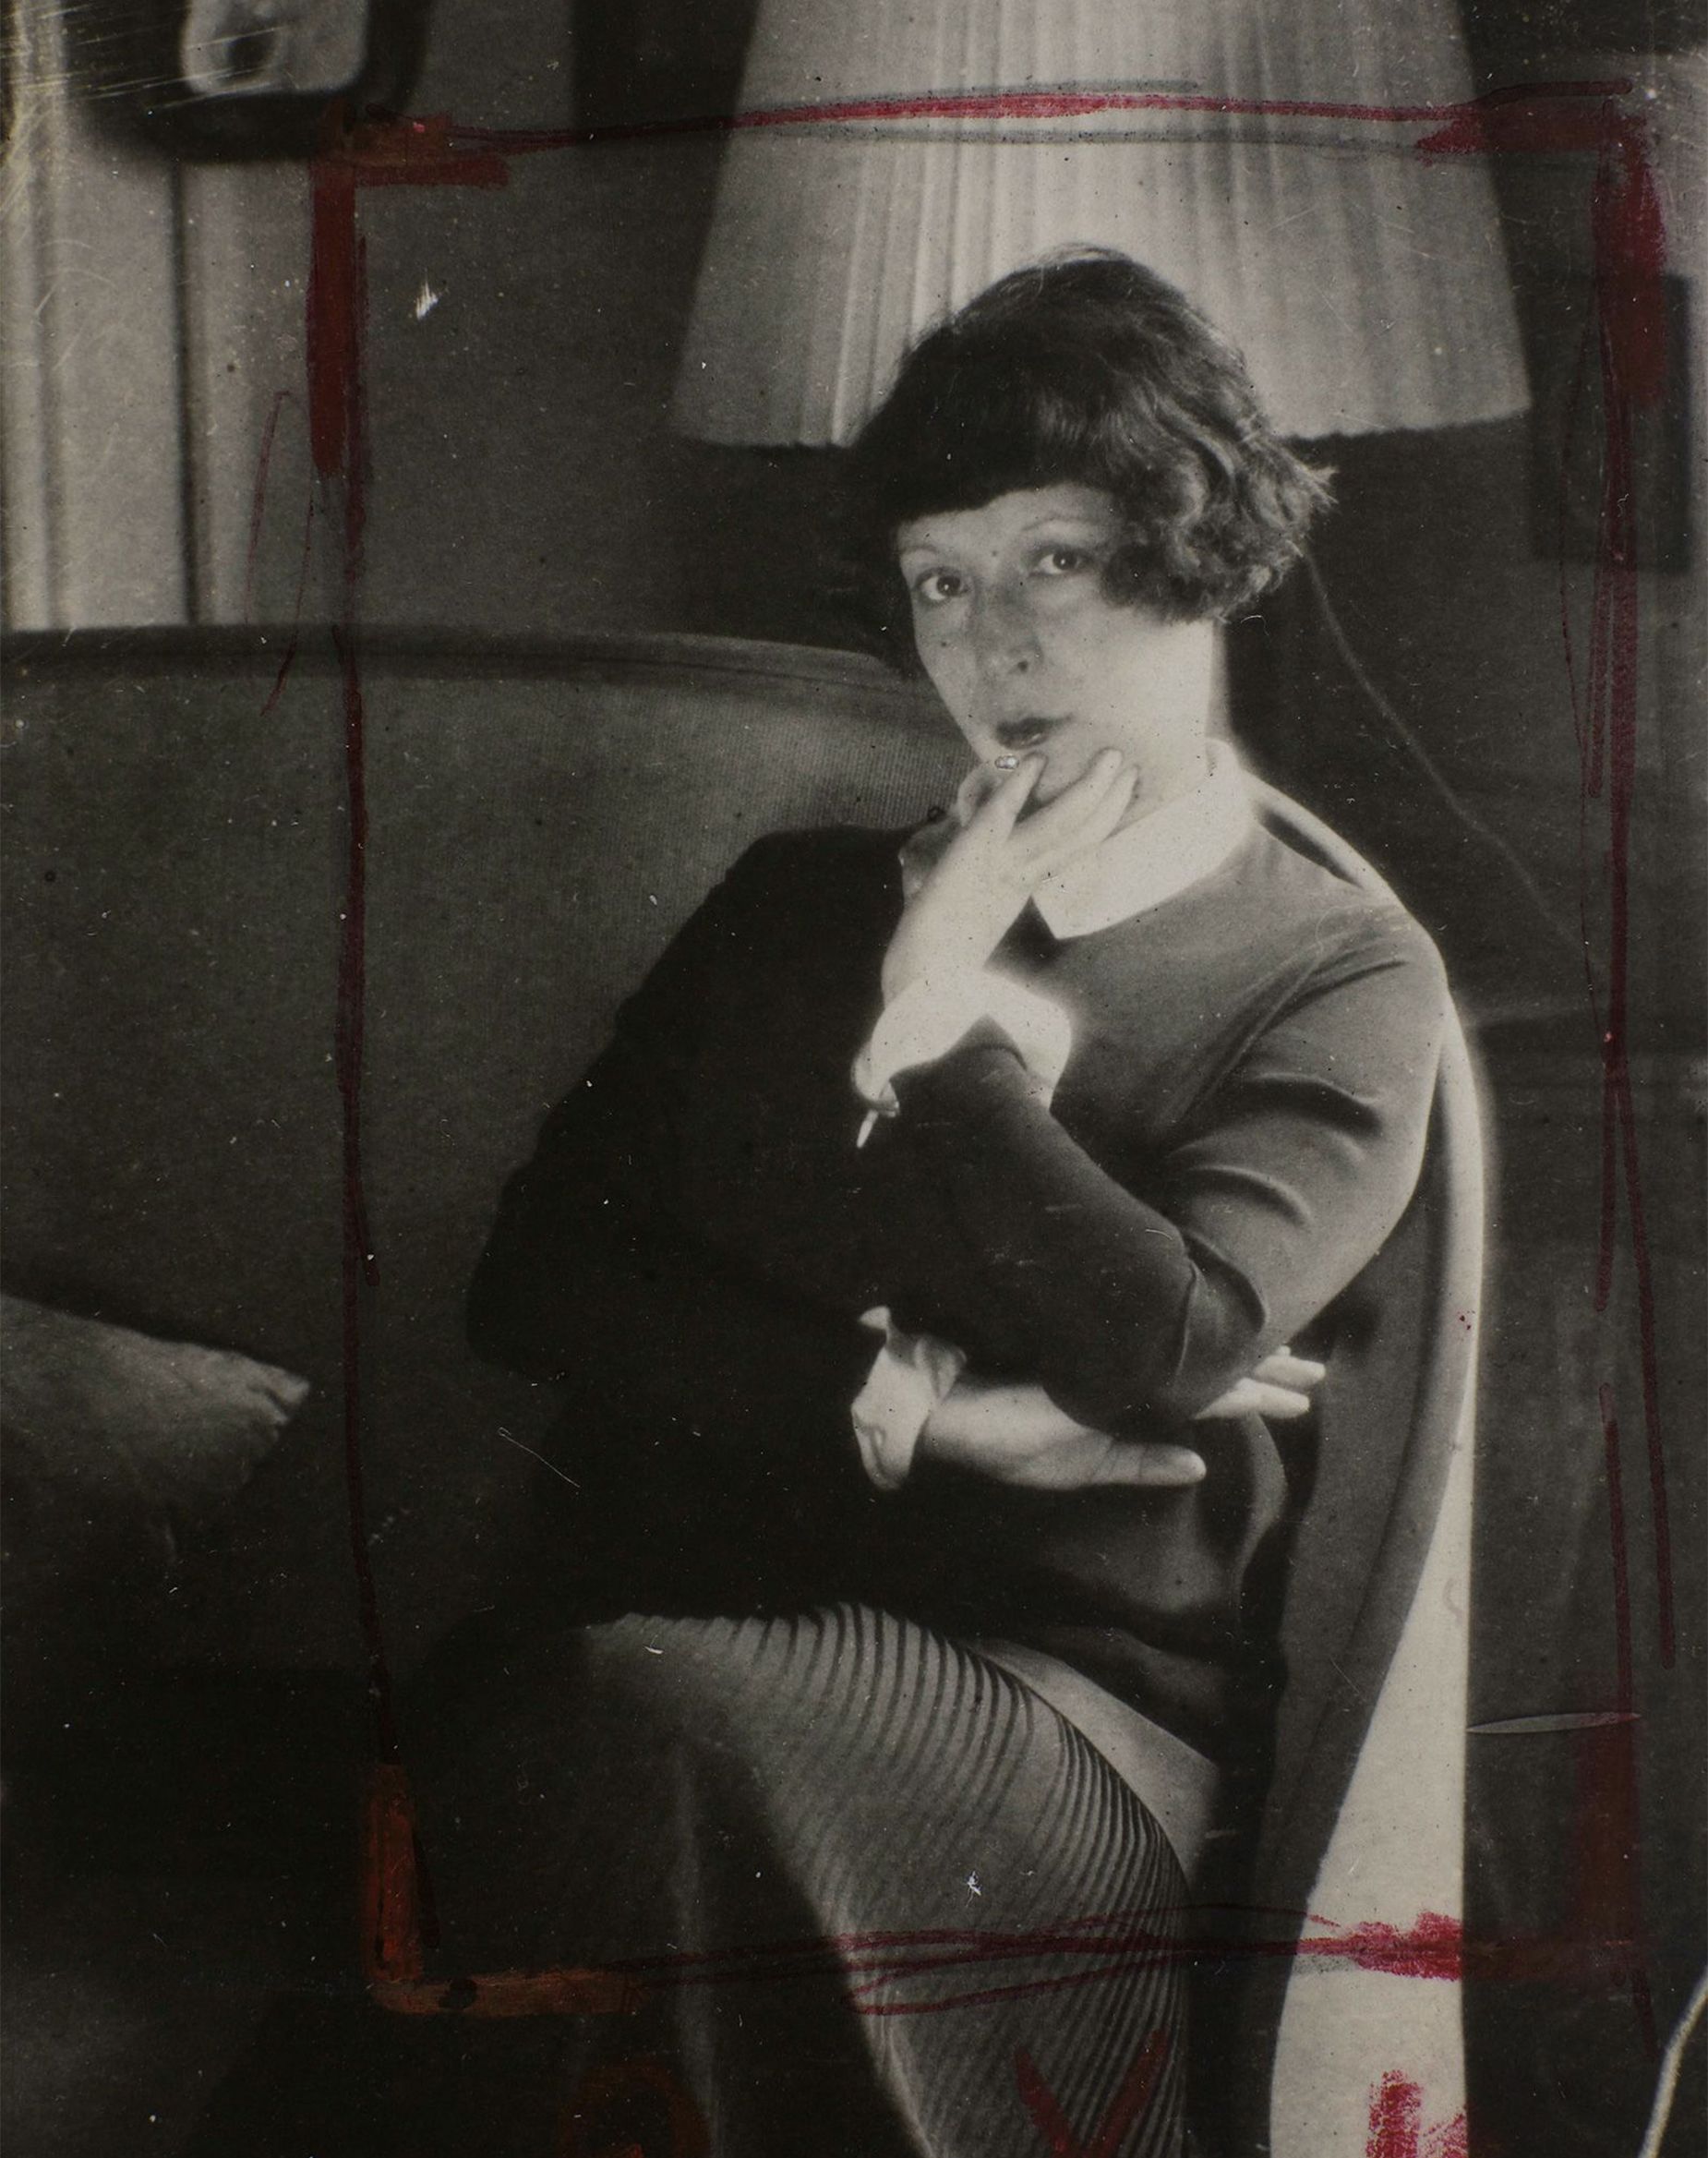 A portrait of Marie Laurencin by Man Ray, 1925.